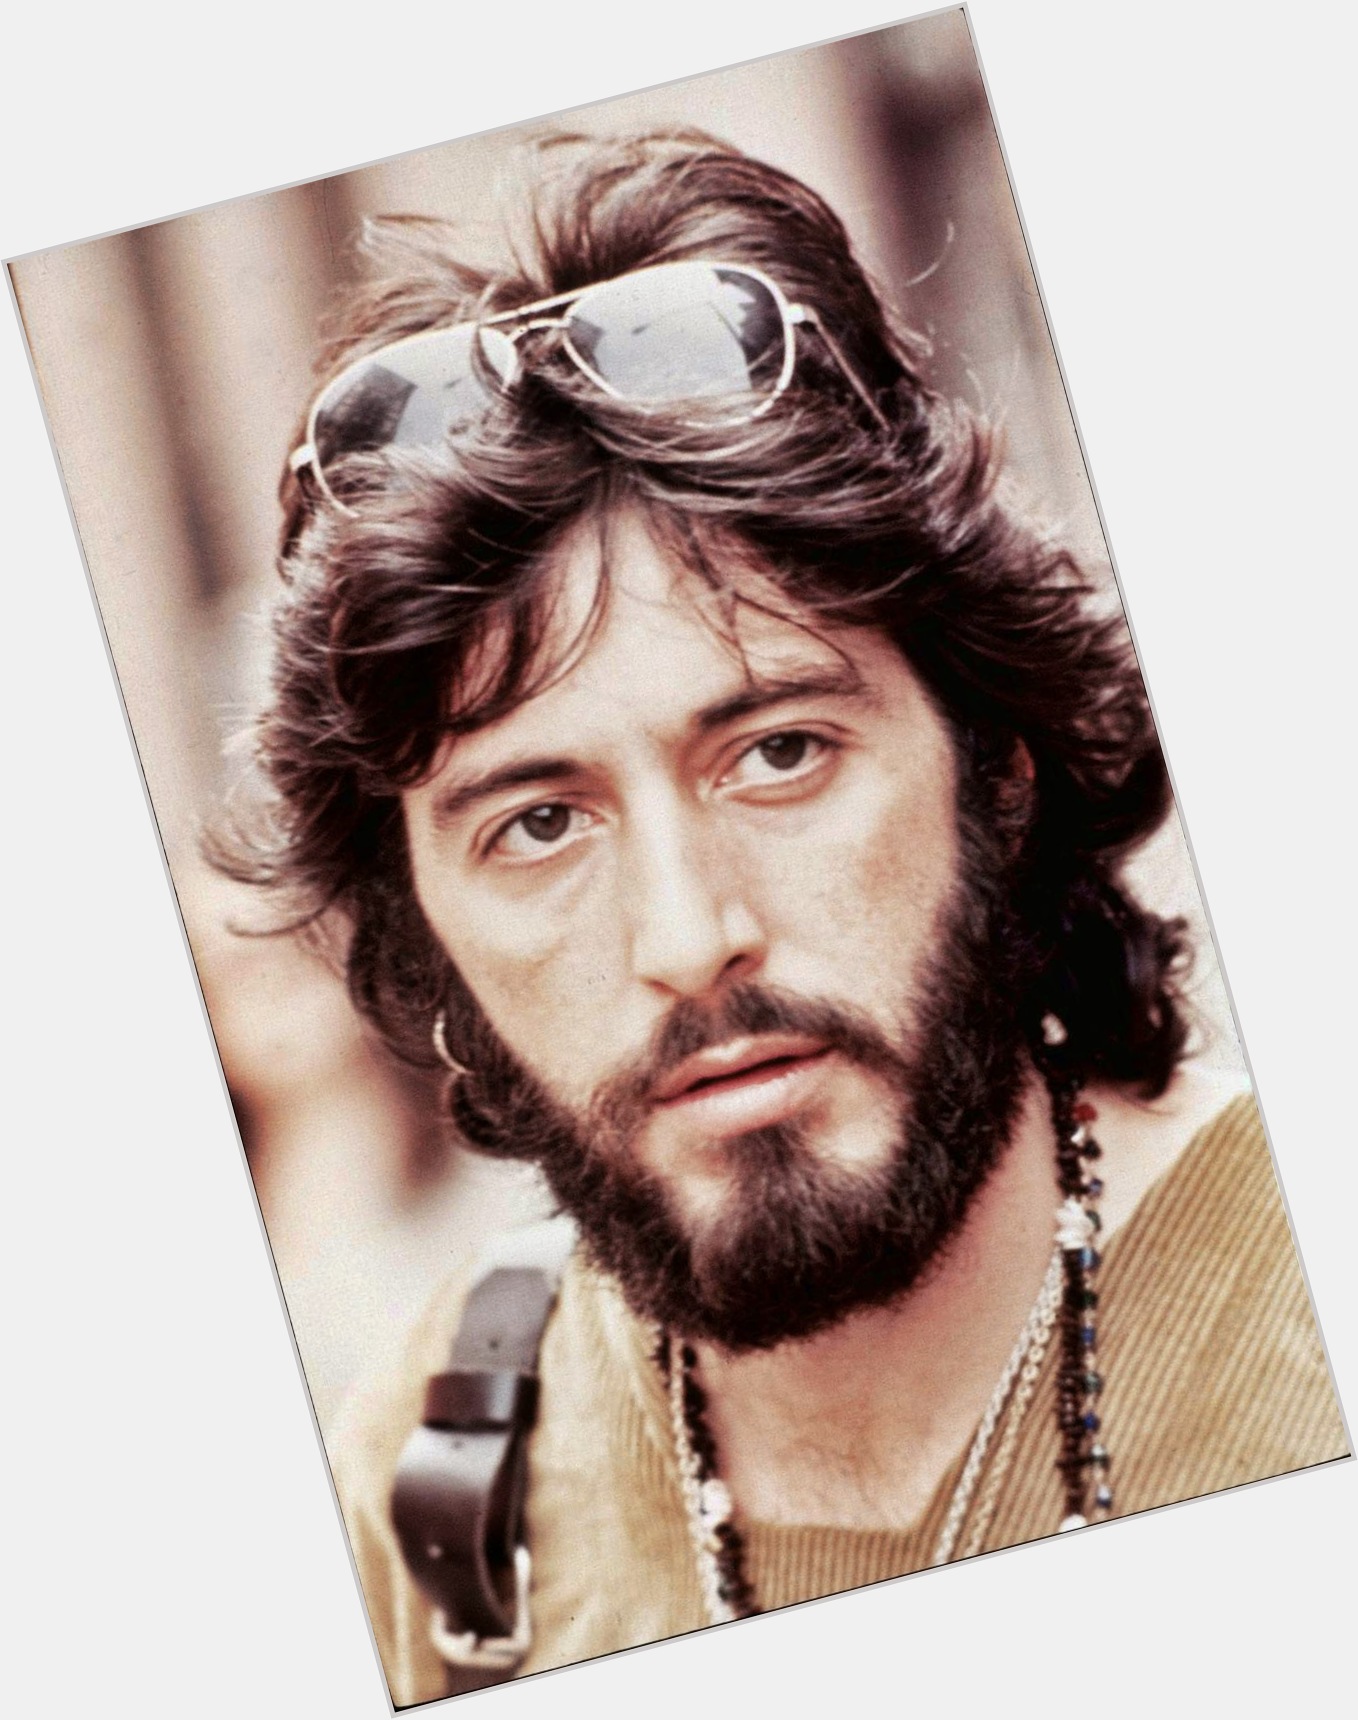 <a href="/hot-men/frank-serpico/is-he-alive-real-what-doing-today-he">Frank Serpico</a> Average body,  salt and pepper hair & hairstyles